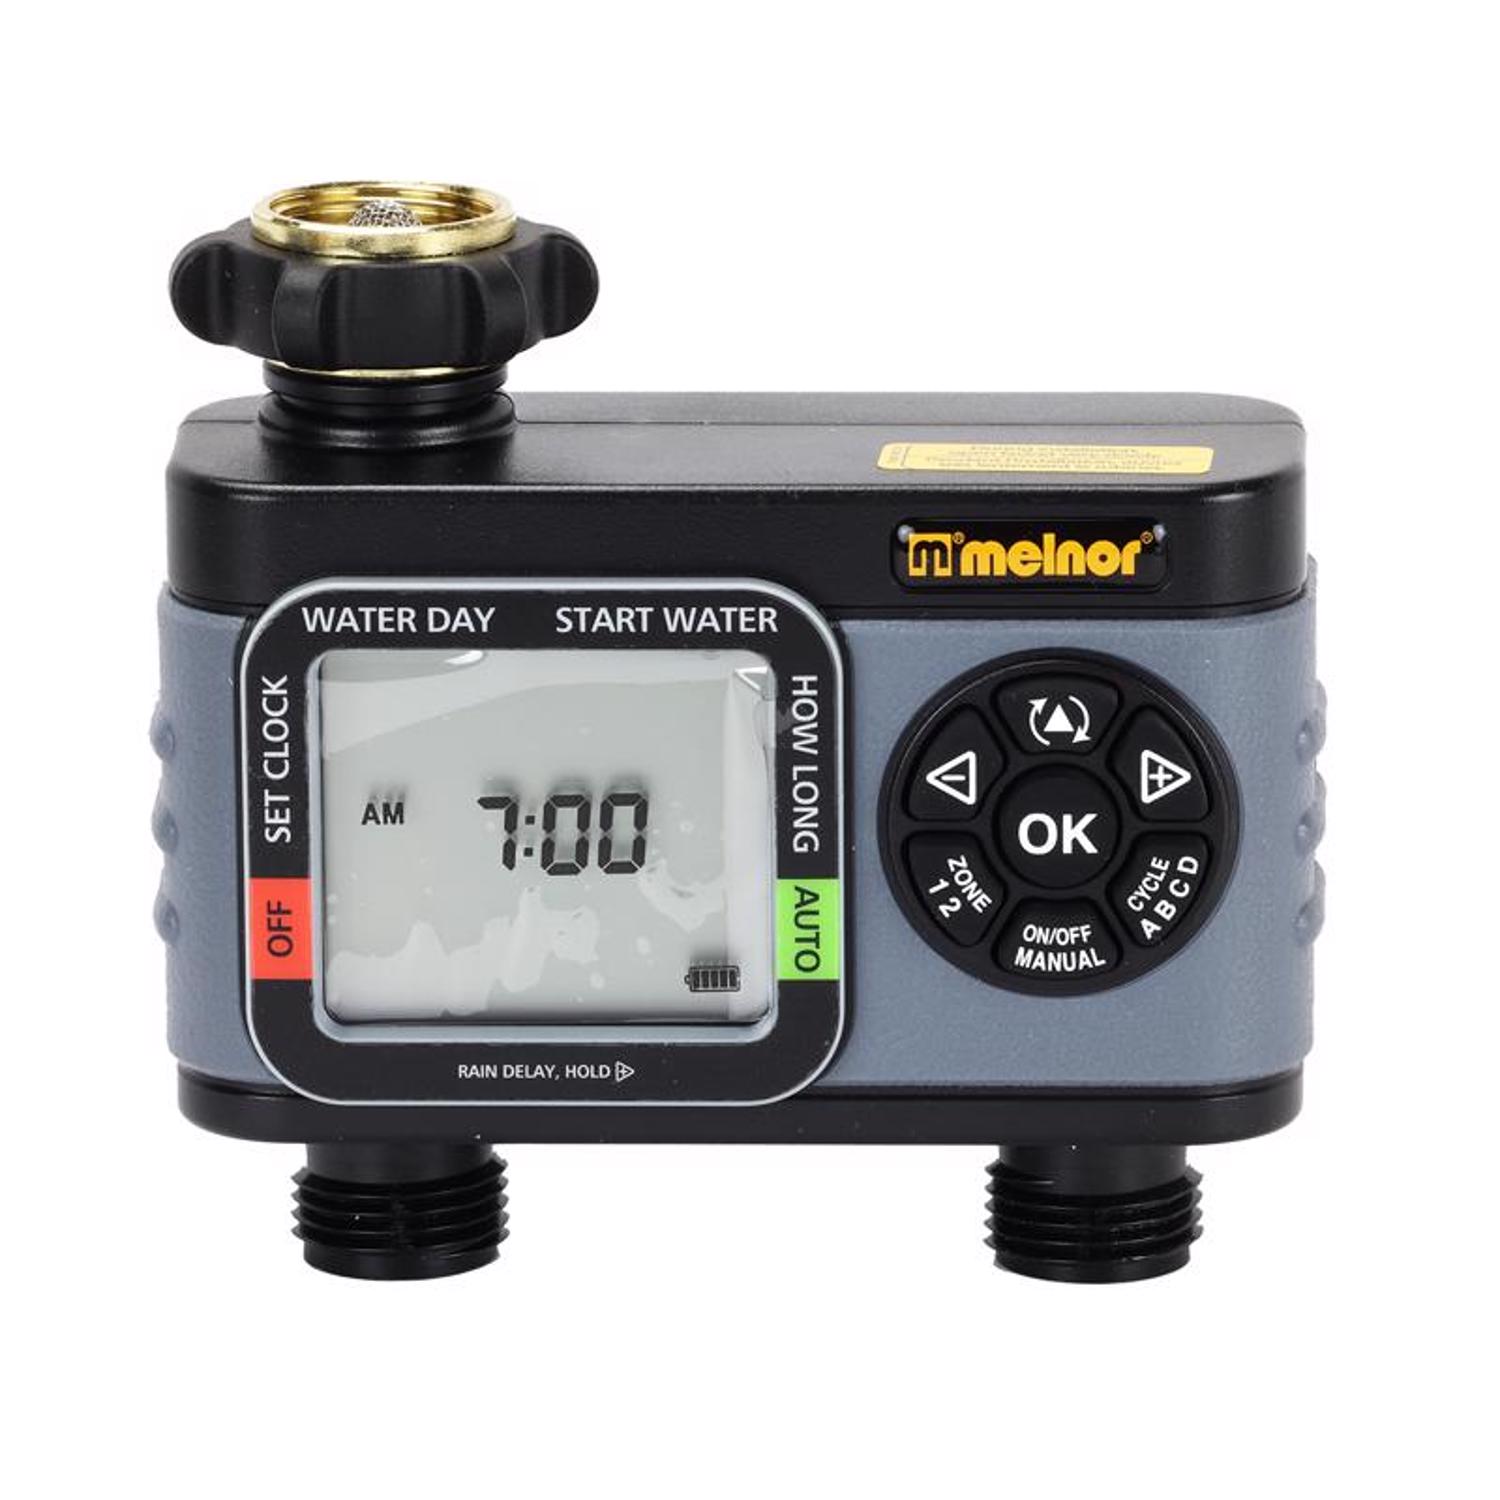 Photos - Other for Irrigation Melnor HydroLogic Programmable 2 Zone Digital Water Timer 73100